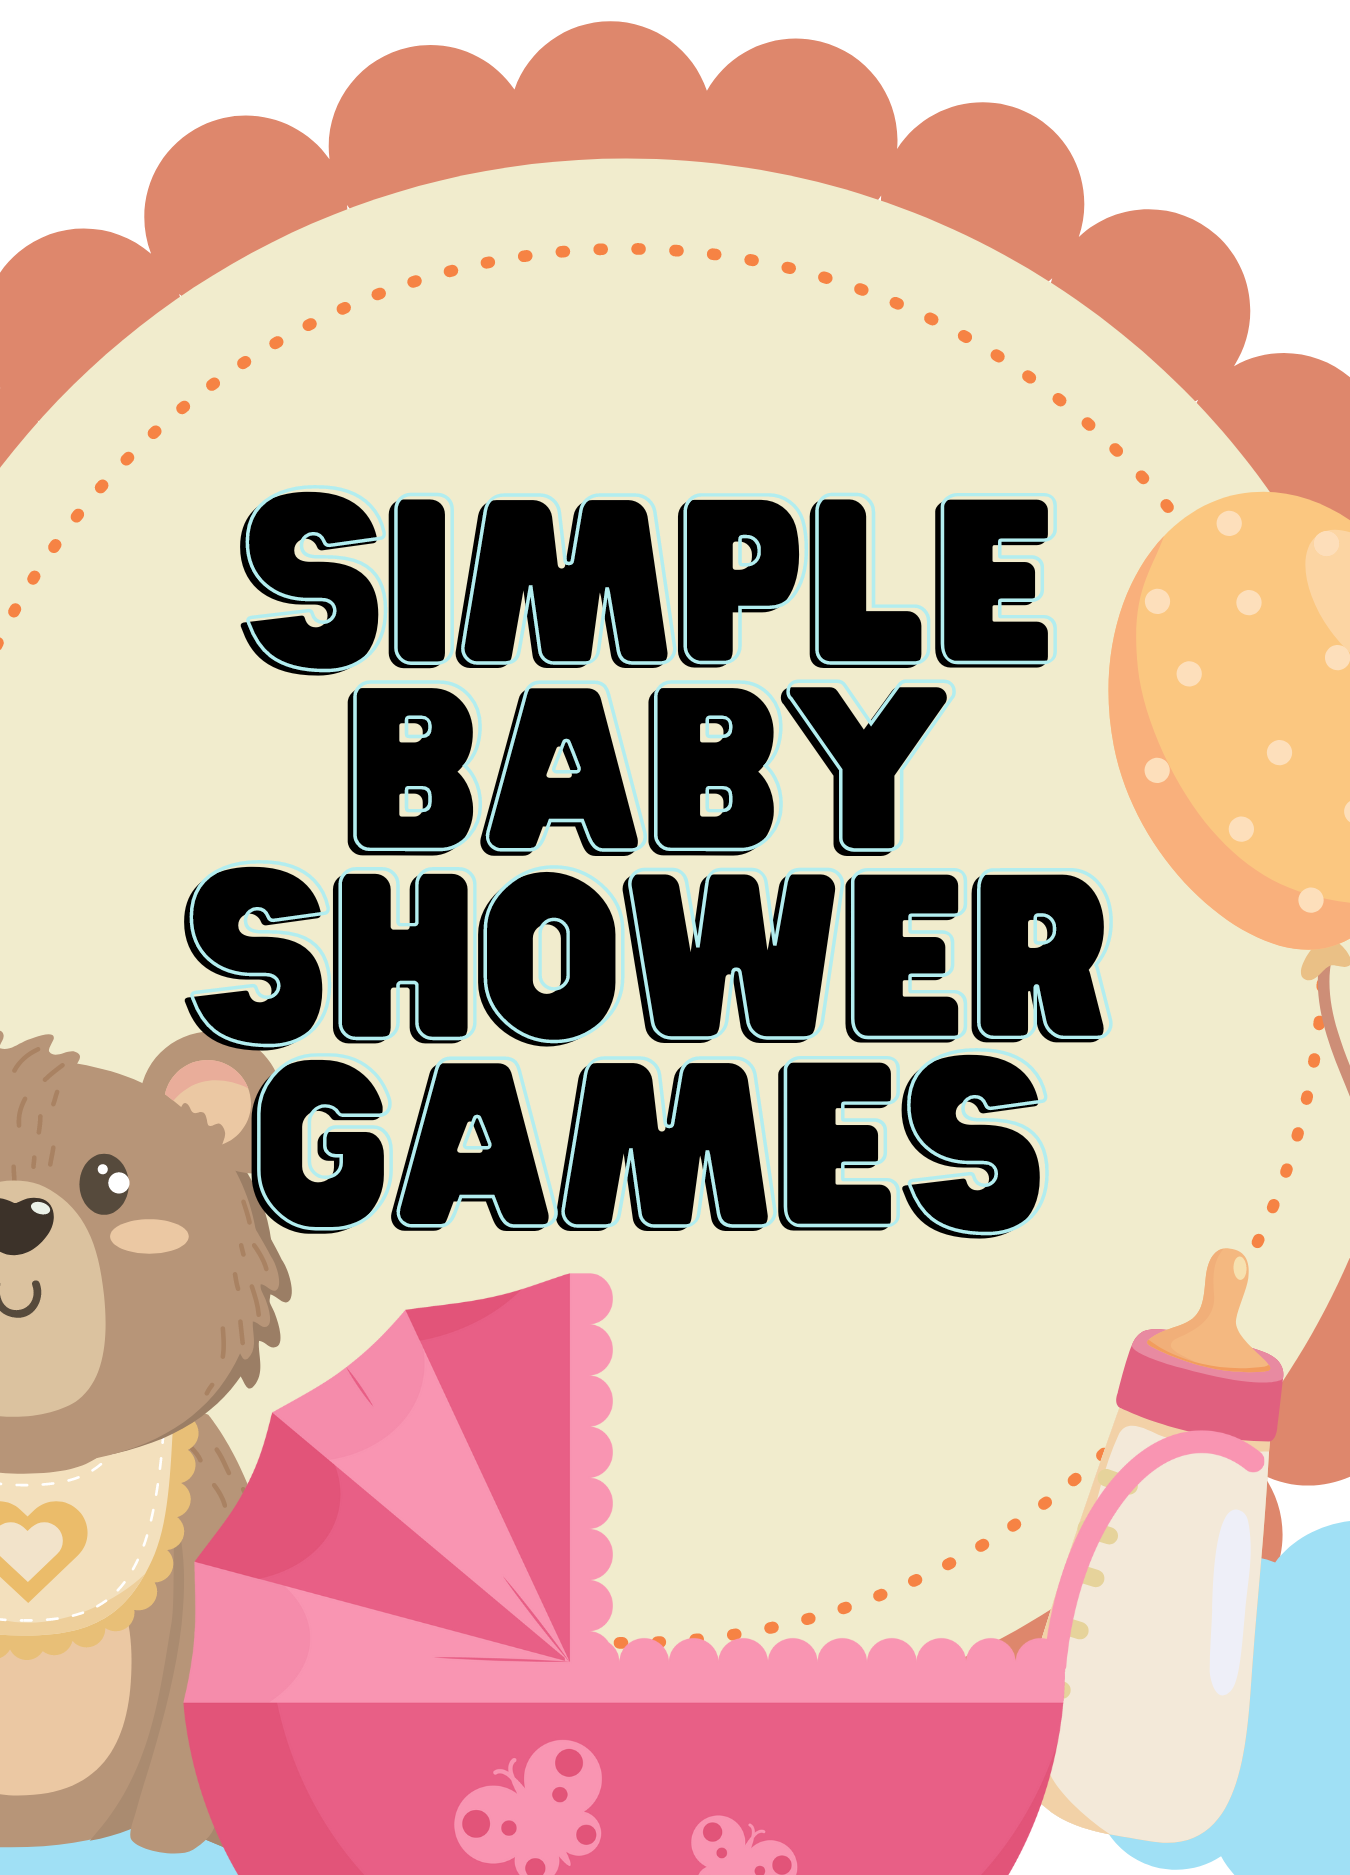 Free Winnie the Pooh Baby Shower Games - My Practical Baby Shower